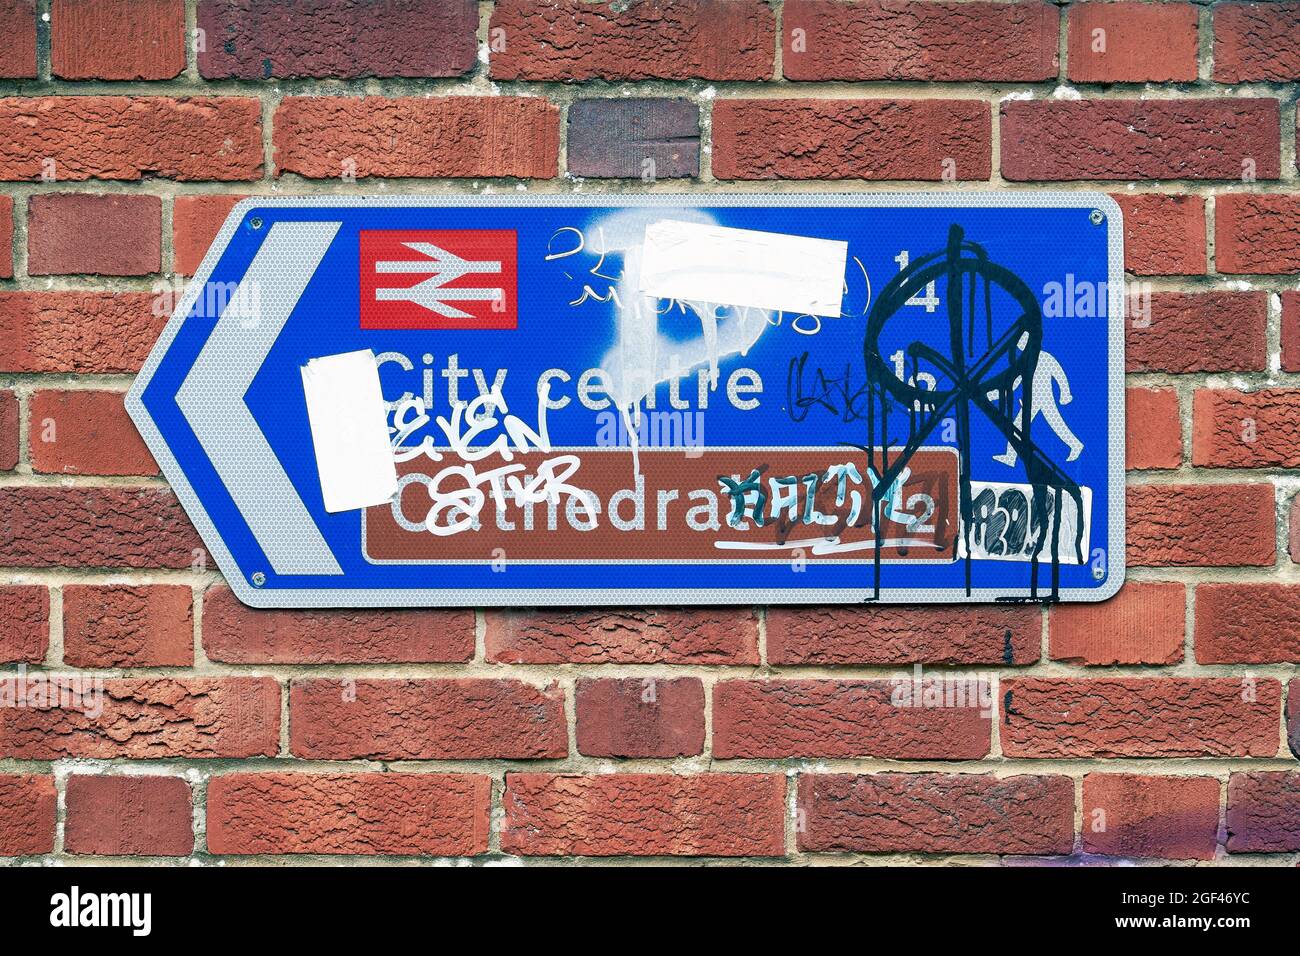 Graffiti covered and vandalised direction sign on red brick wall Stock Photo